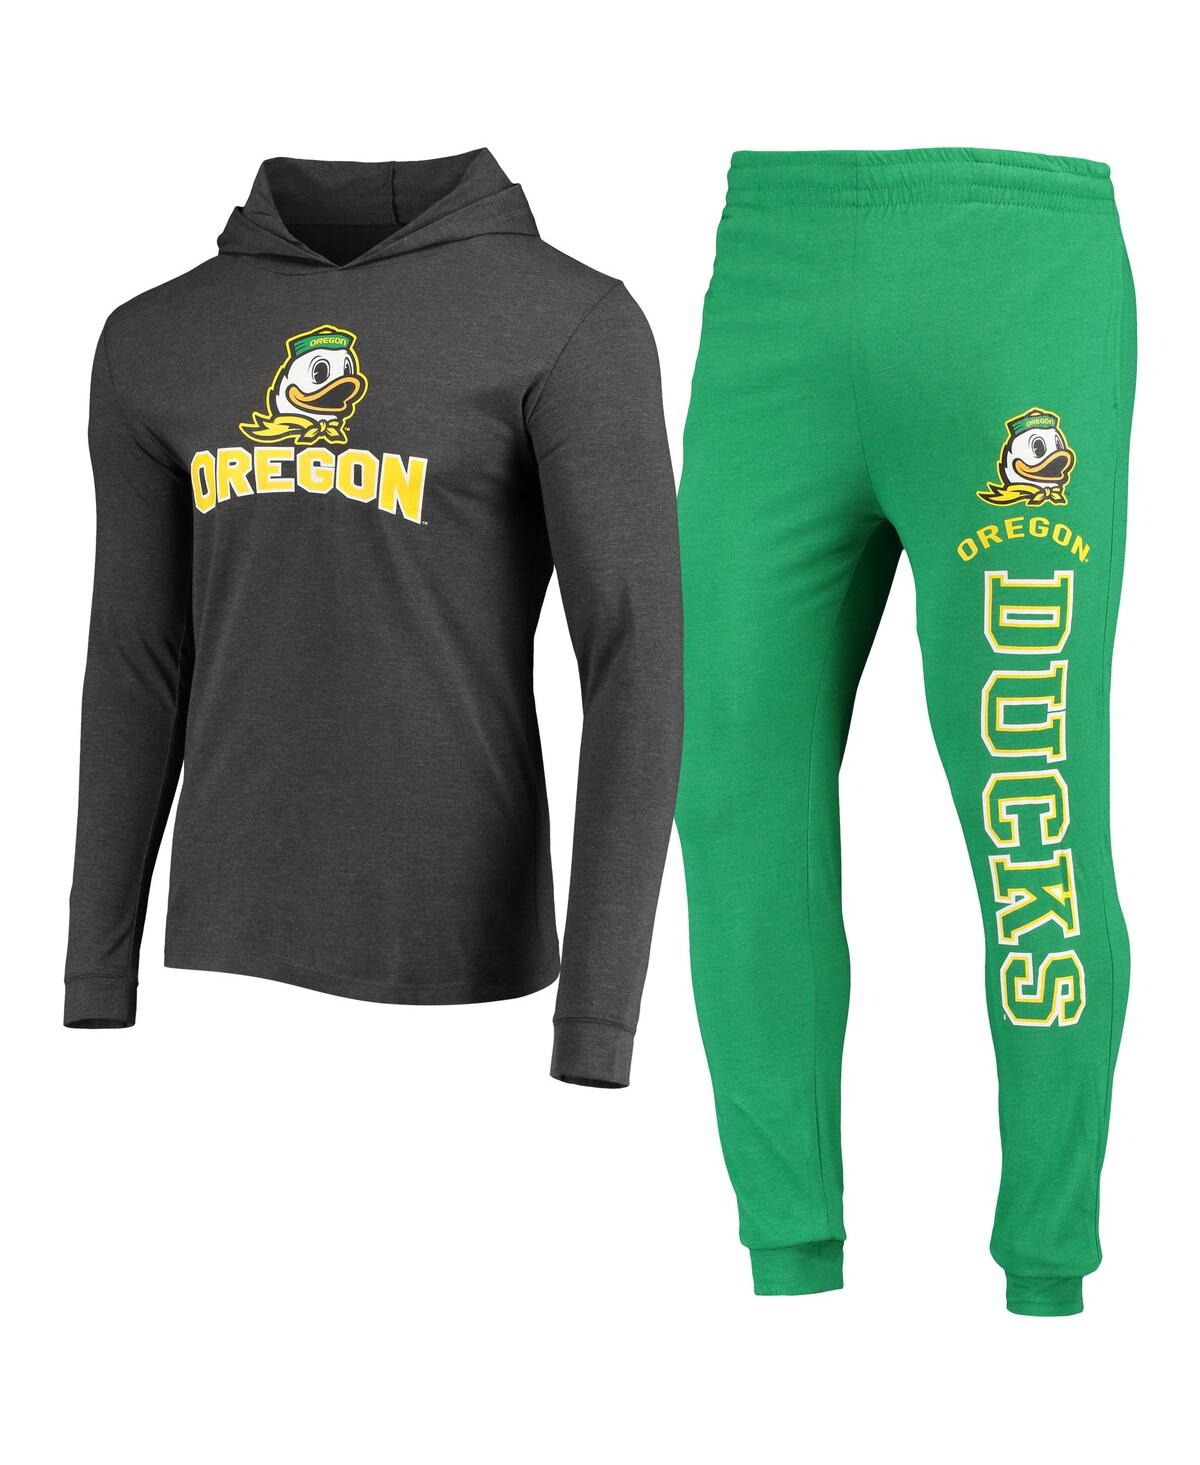 Men's Concepts Sport Green, Heather Charcoal Oregon Ducks Meter Long Sleeve Hoodie T-shirt and Jogger Pajama Set - Green, Heather Charcoal